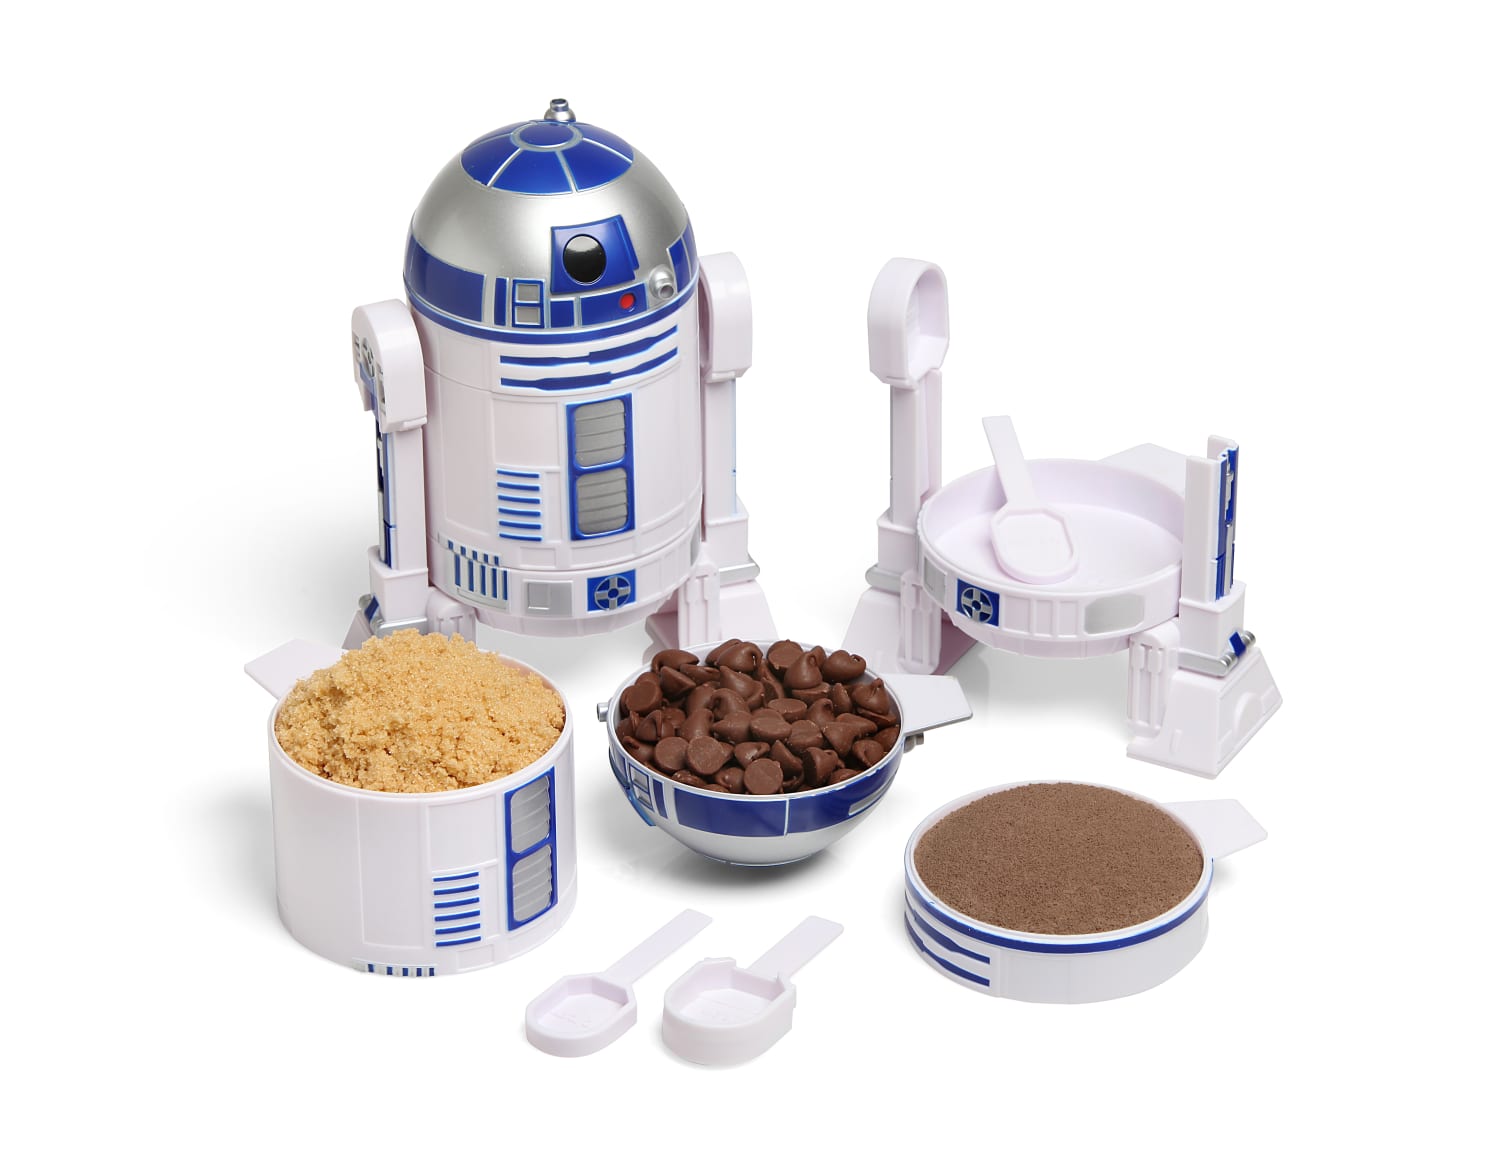 Star Wars' fan? Here's how you stock your kitchen with movie-themed treats